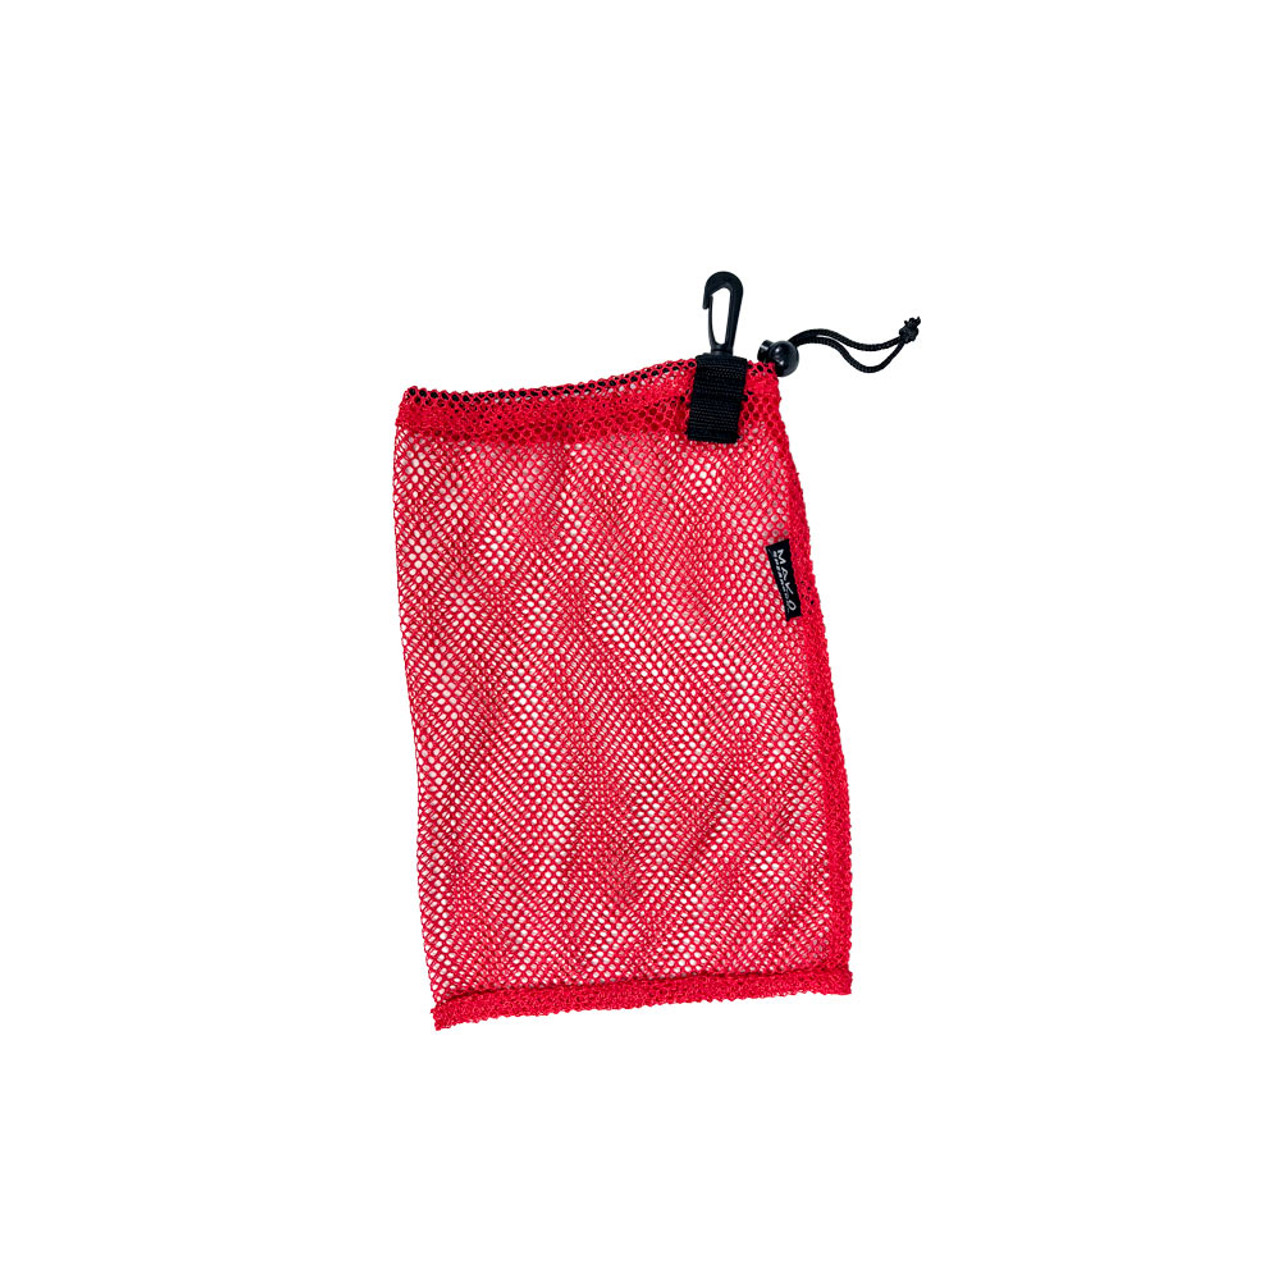 Small Red Mesh Bags